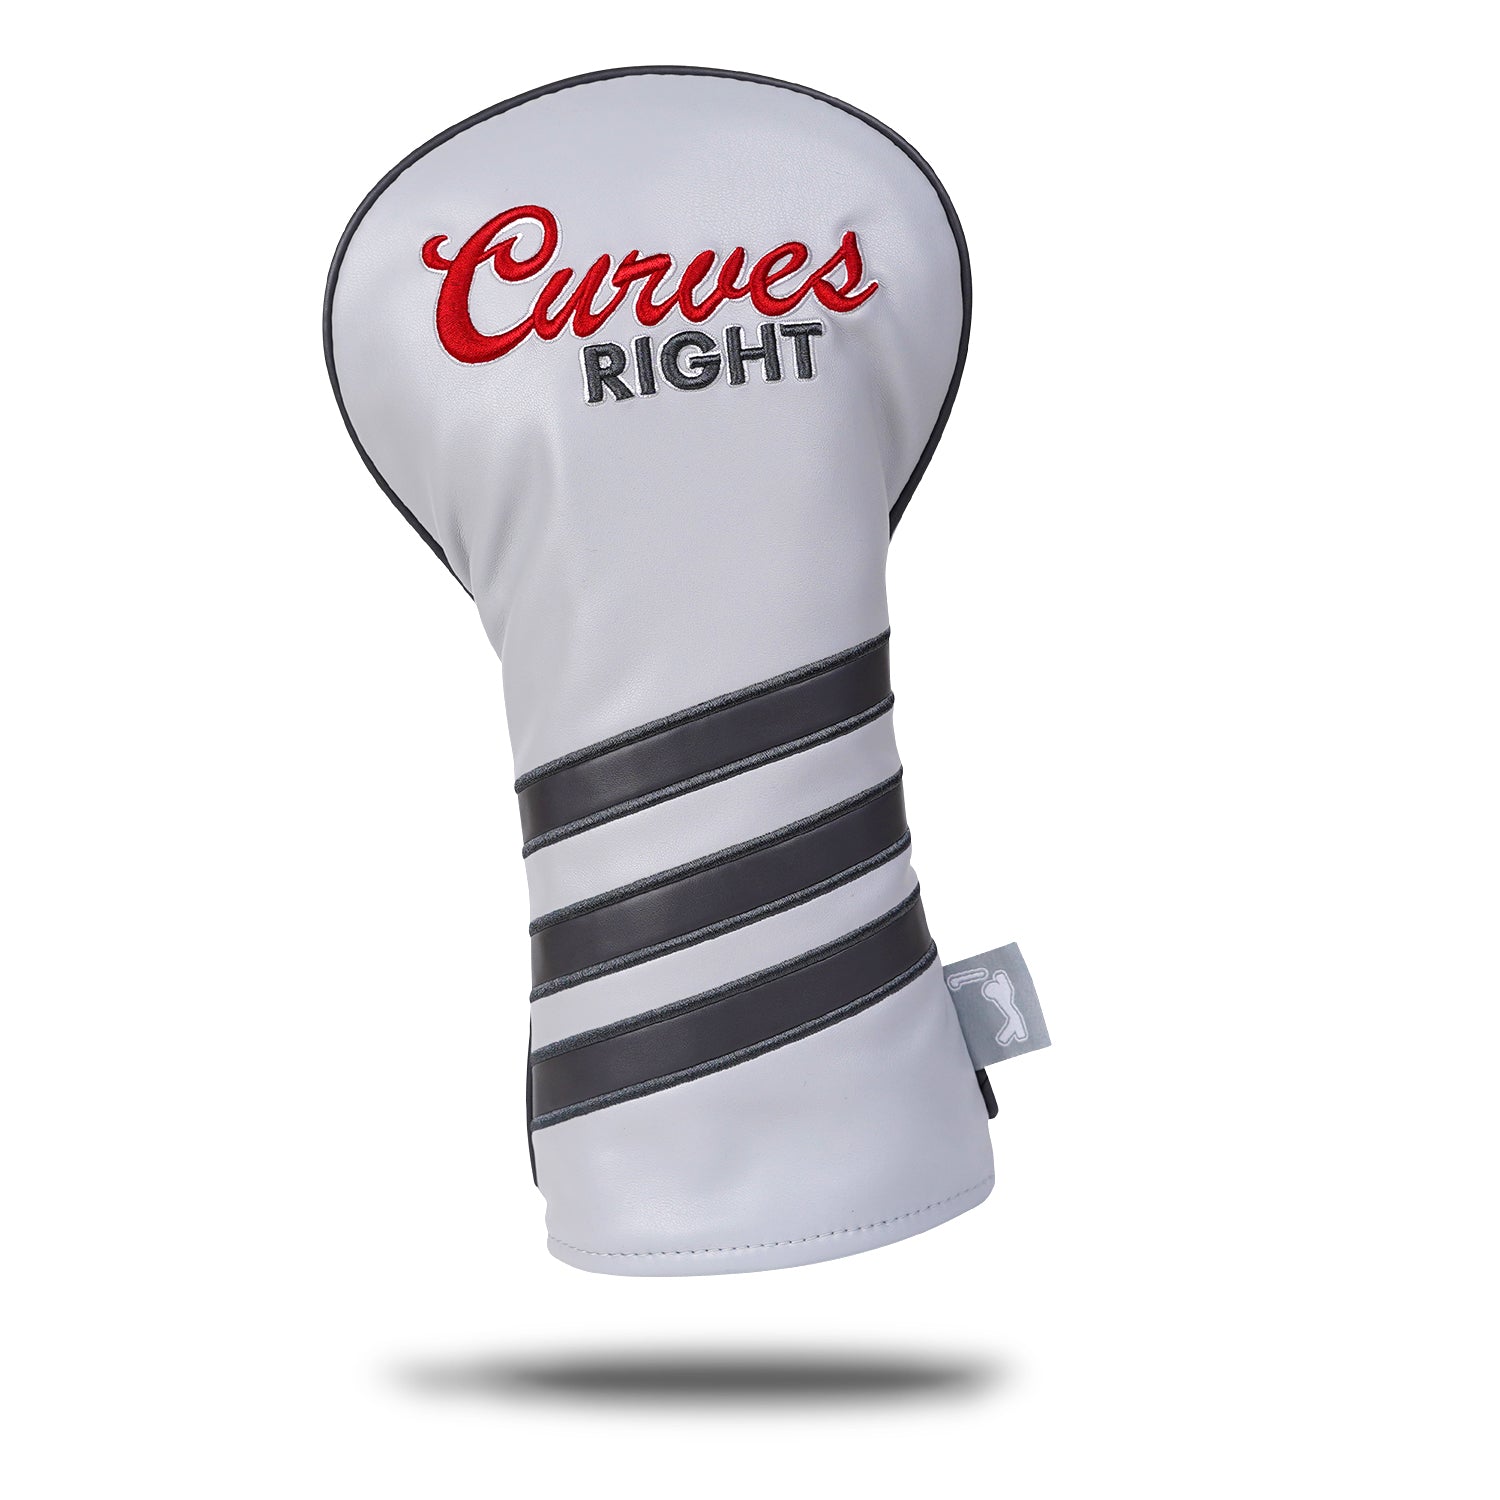 Curves Right - Driver Headcover